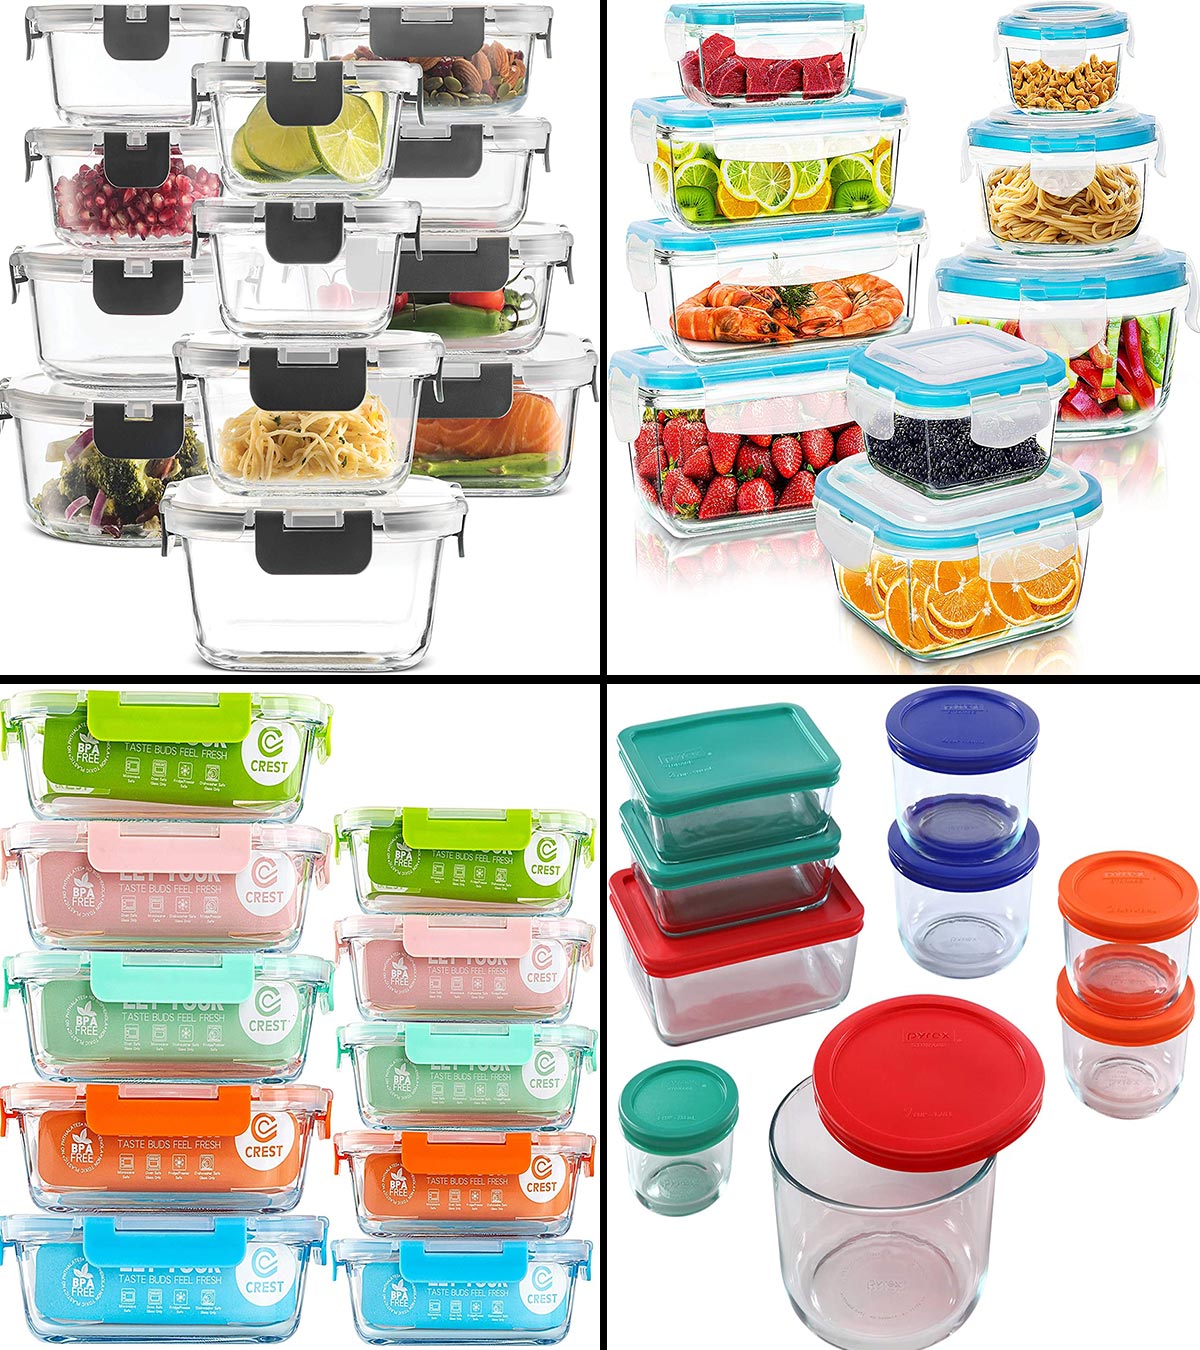 https://www.momjunction.com/wp-content/uploads/2021/06/13-Best-Glass-Food-Storage-Containers-In-2021-2.jpg